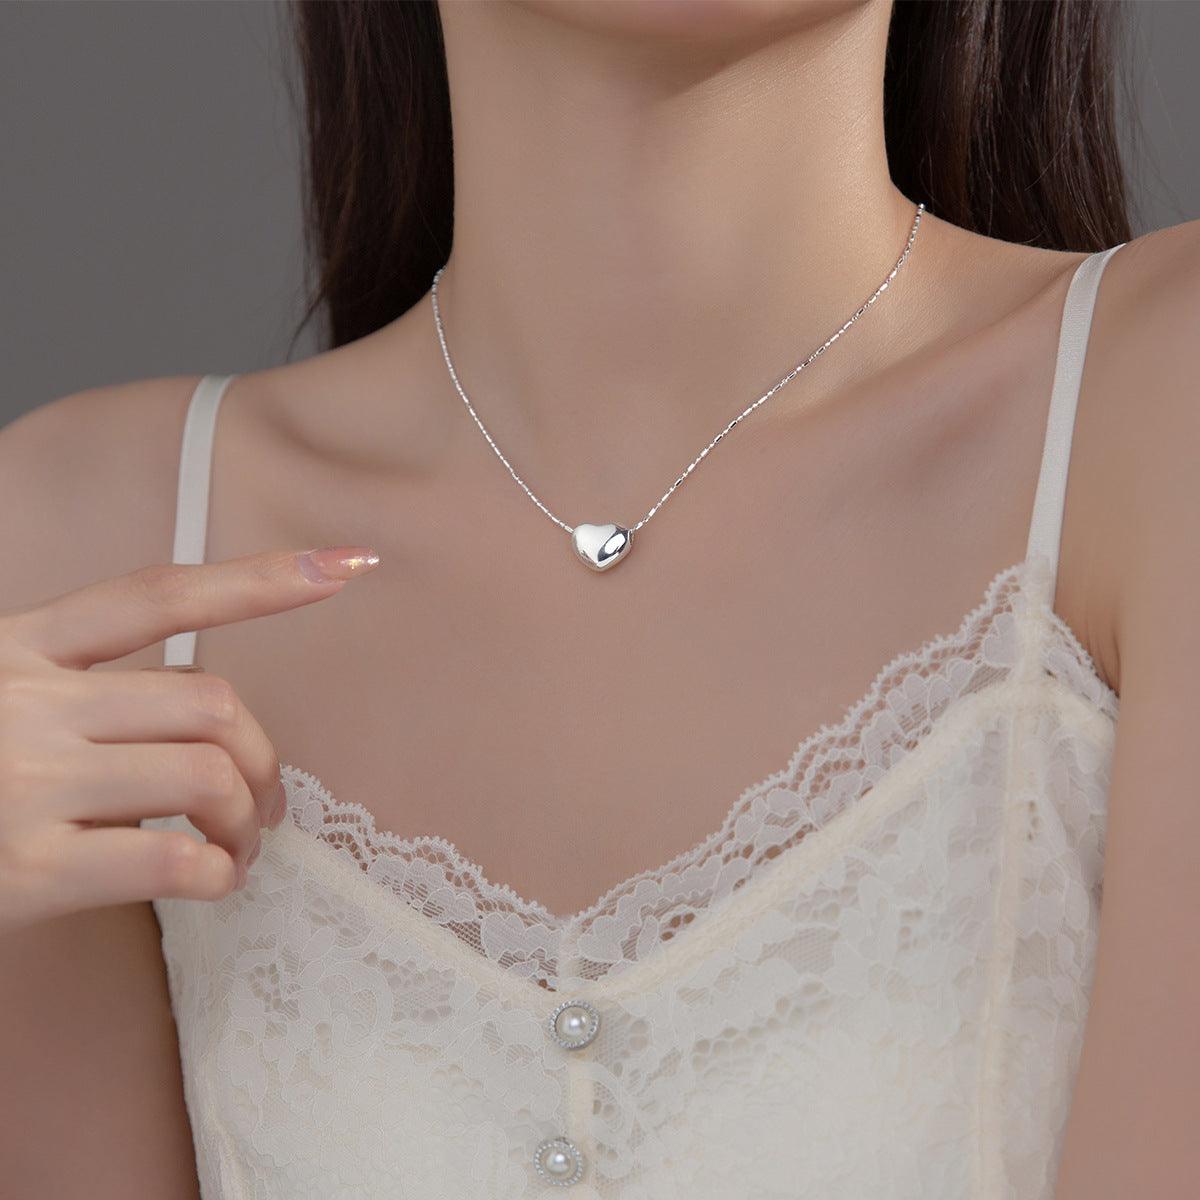 S925 Sterling Silver Simple Smooth Love Necklace | MODE BY OH